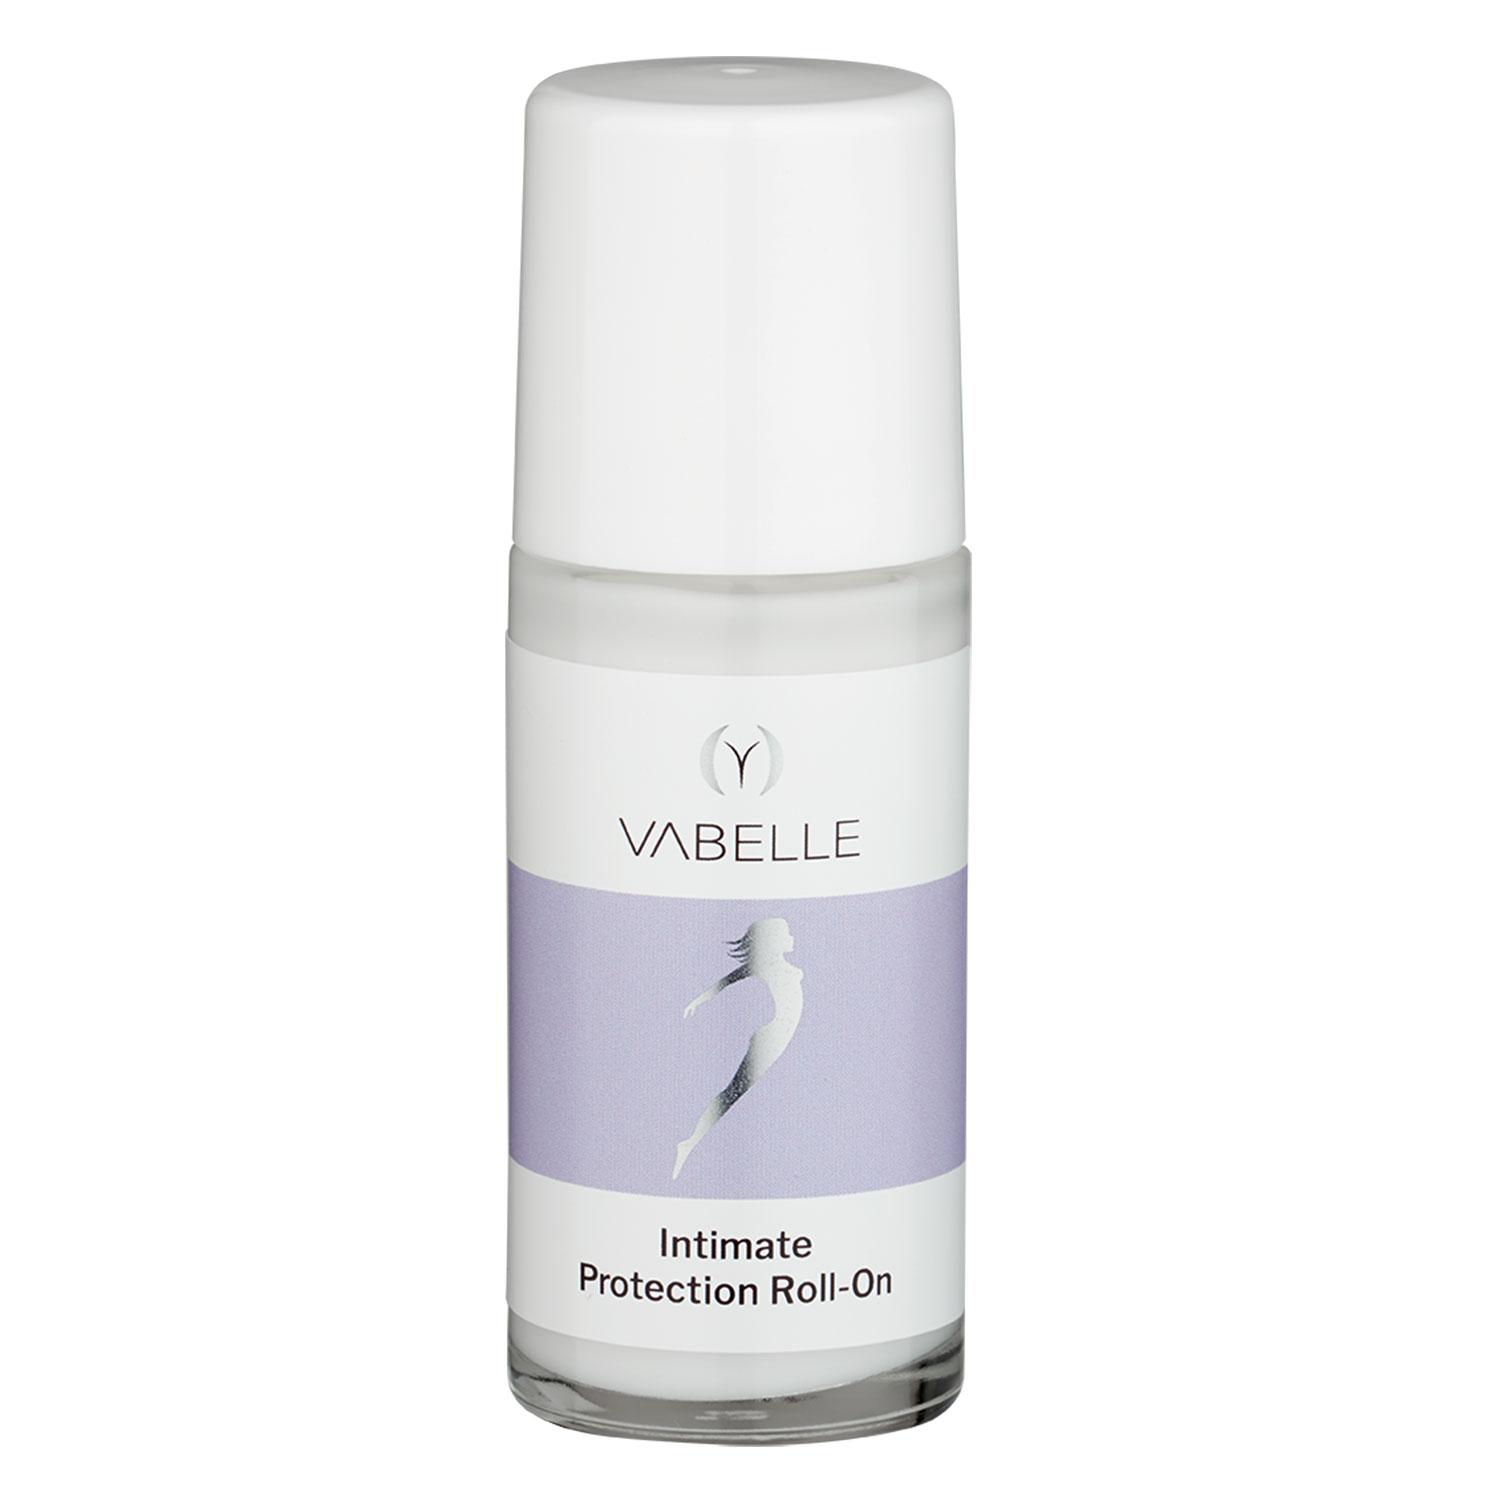 Vabelle - Intimate Protection Roll-On